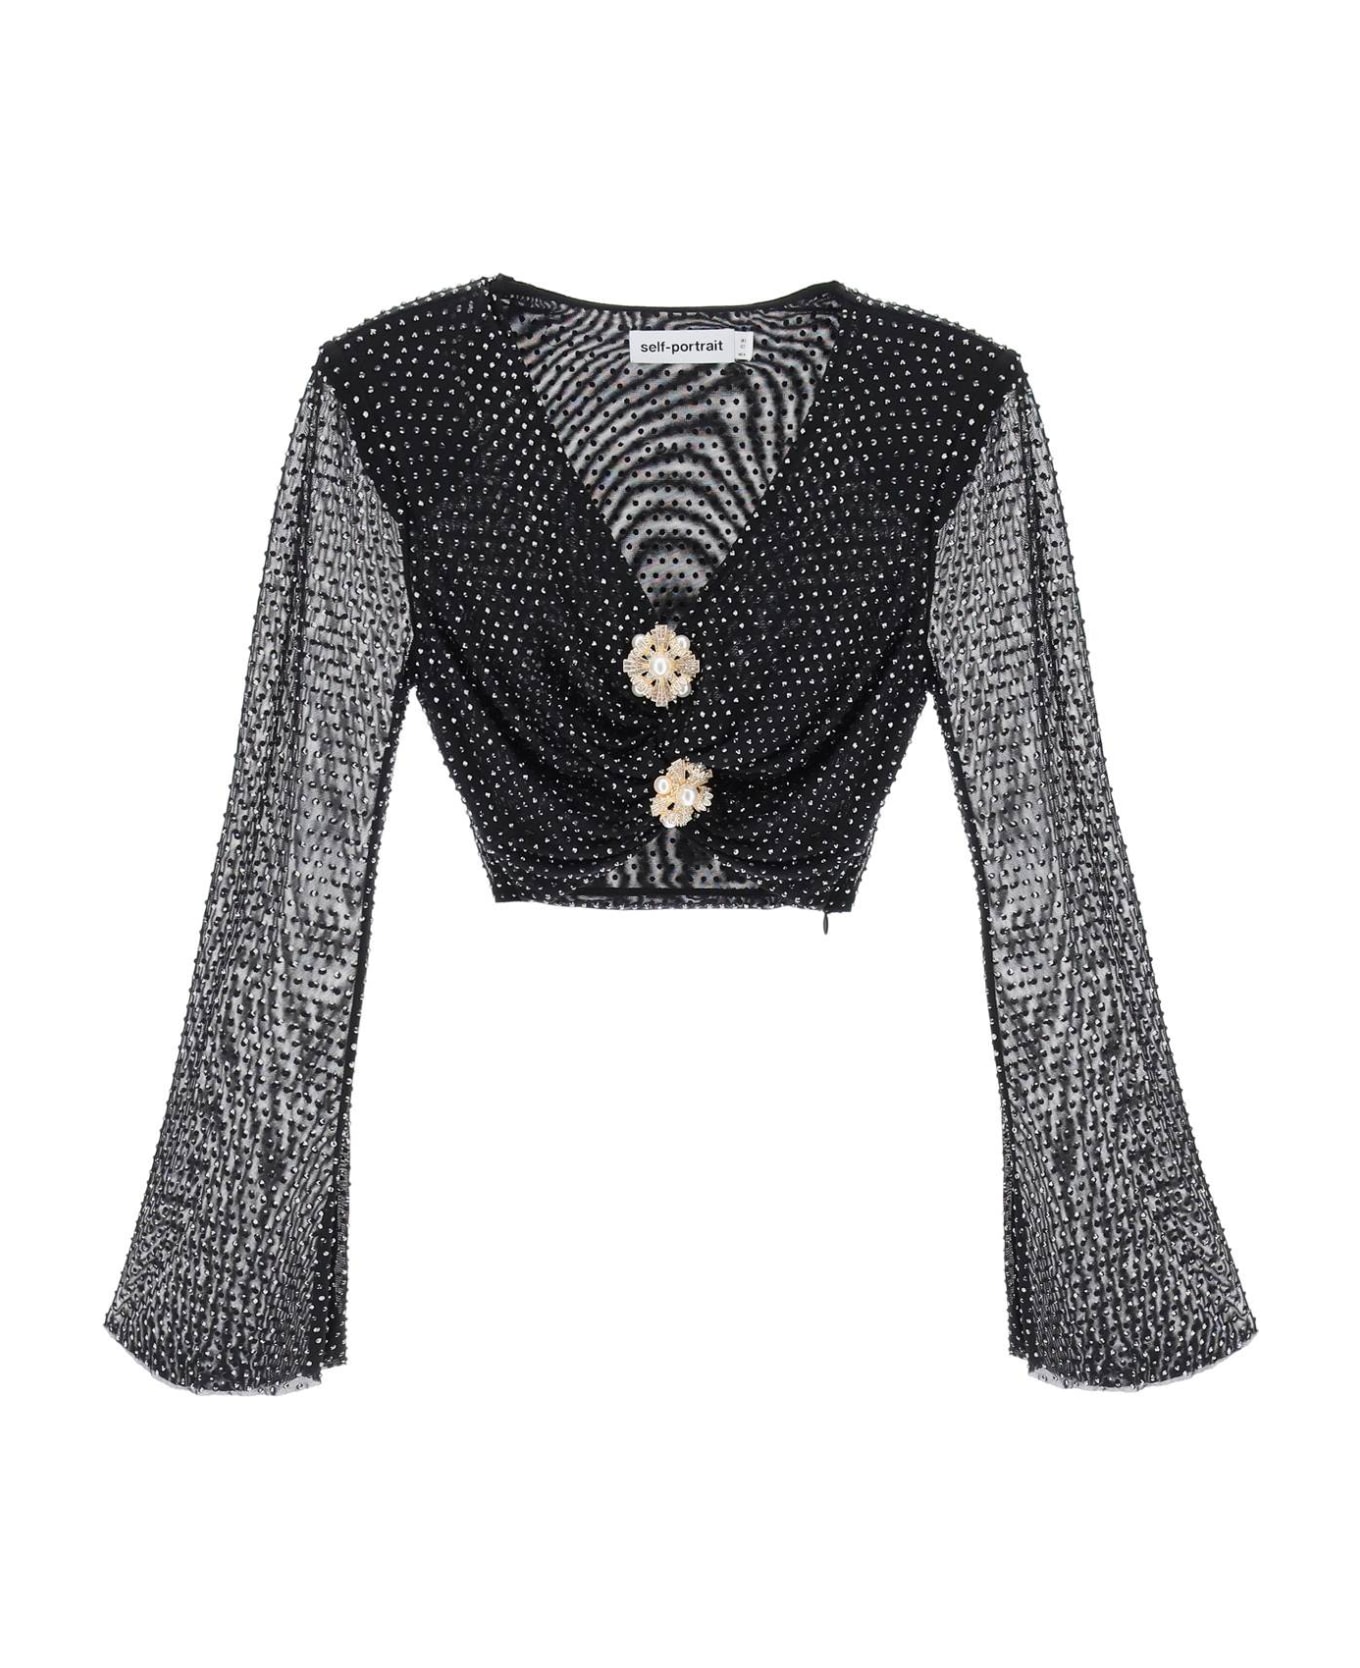 self-portrait Rhinestone-studded Cropped Top With Diamanté Brooches - Black